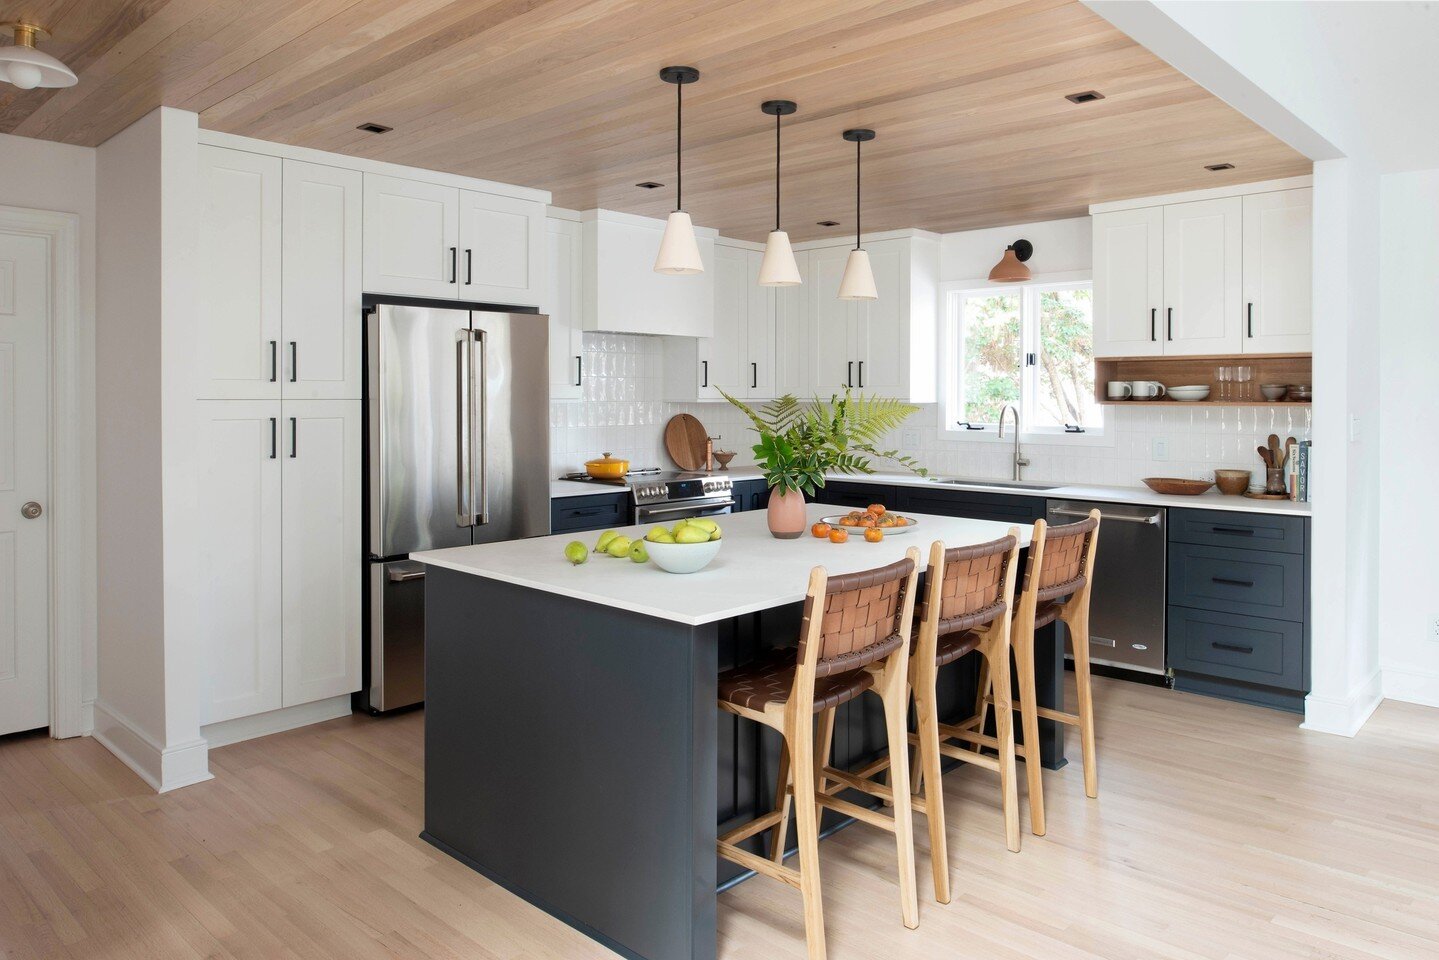 It's a new year and we have a new project to share! In this renovation of a 1980s home, we removed walls to open up the kitchen to the living and dining spaces. The kitchen was completely reimagined, floors were refinished, and we added a beautiful w